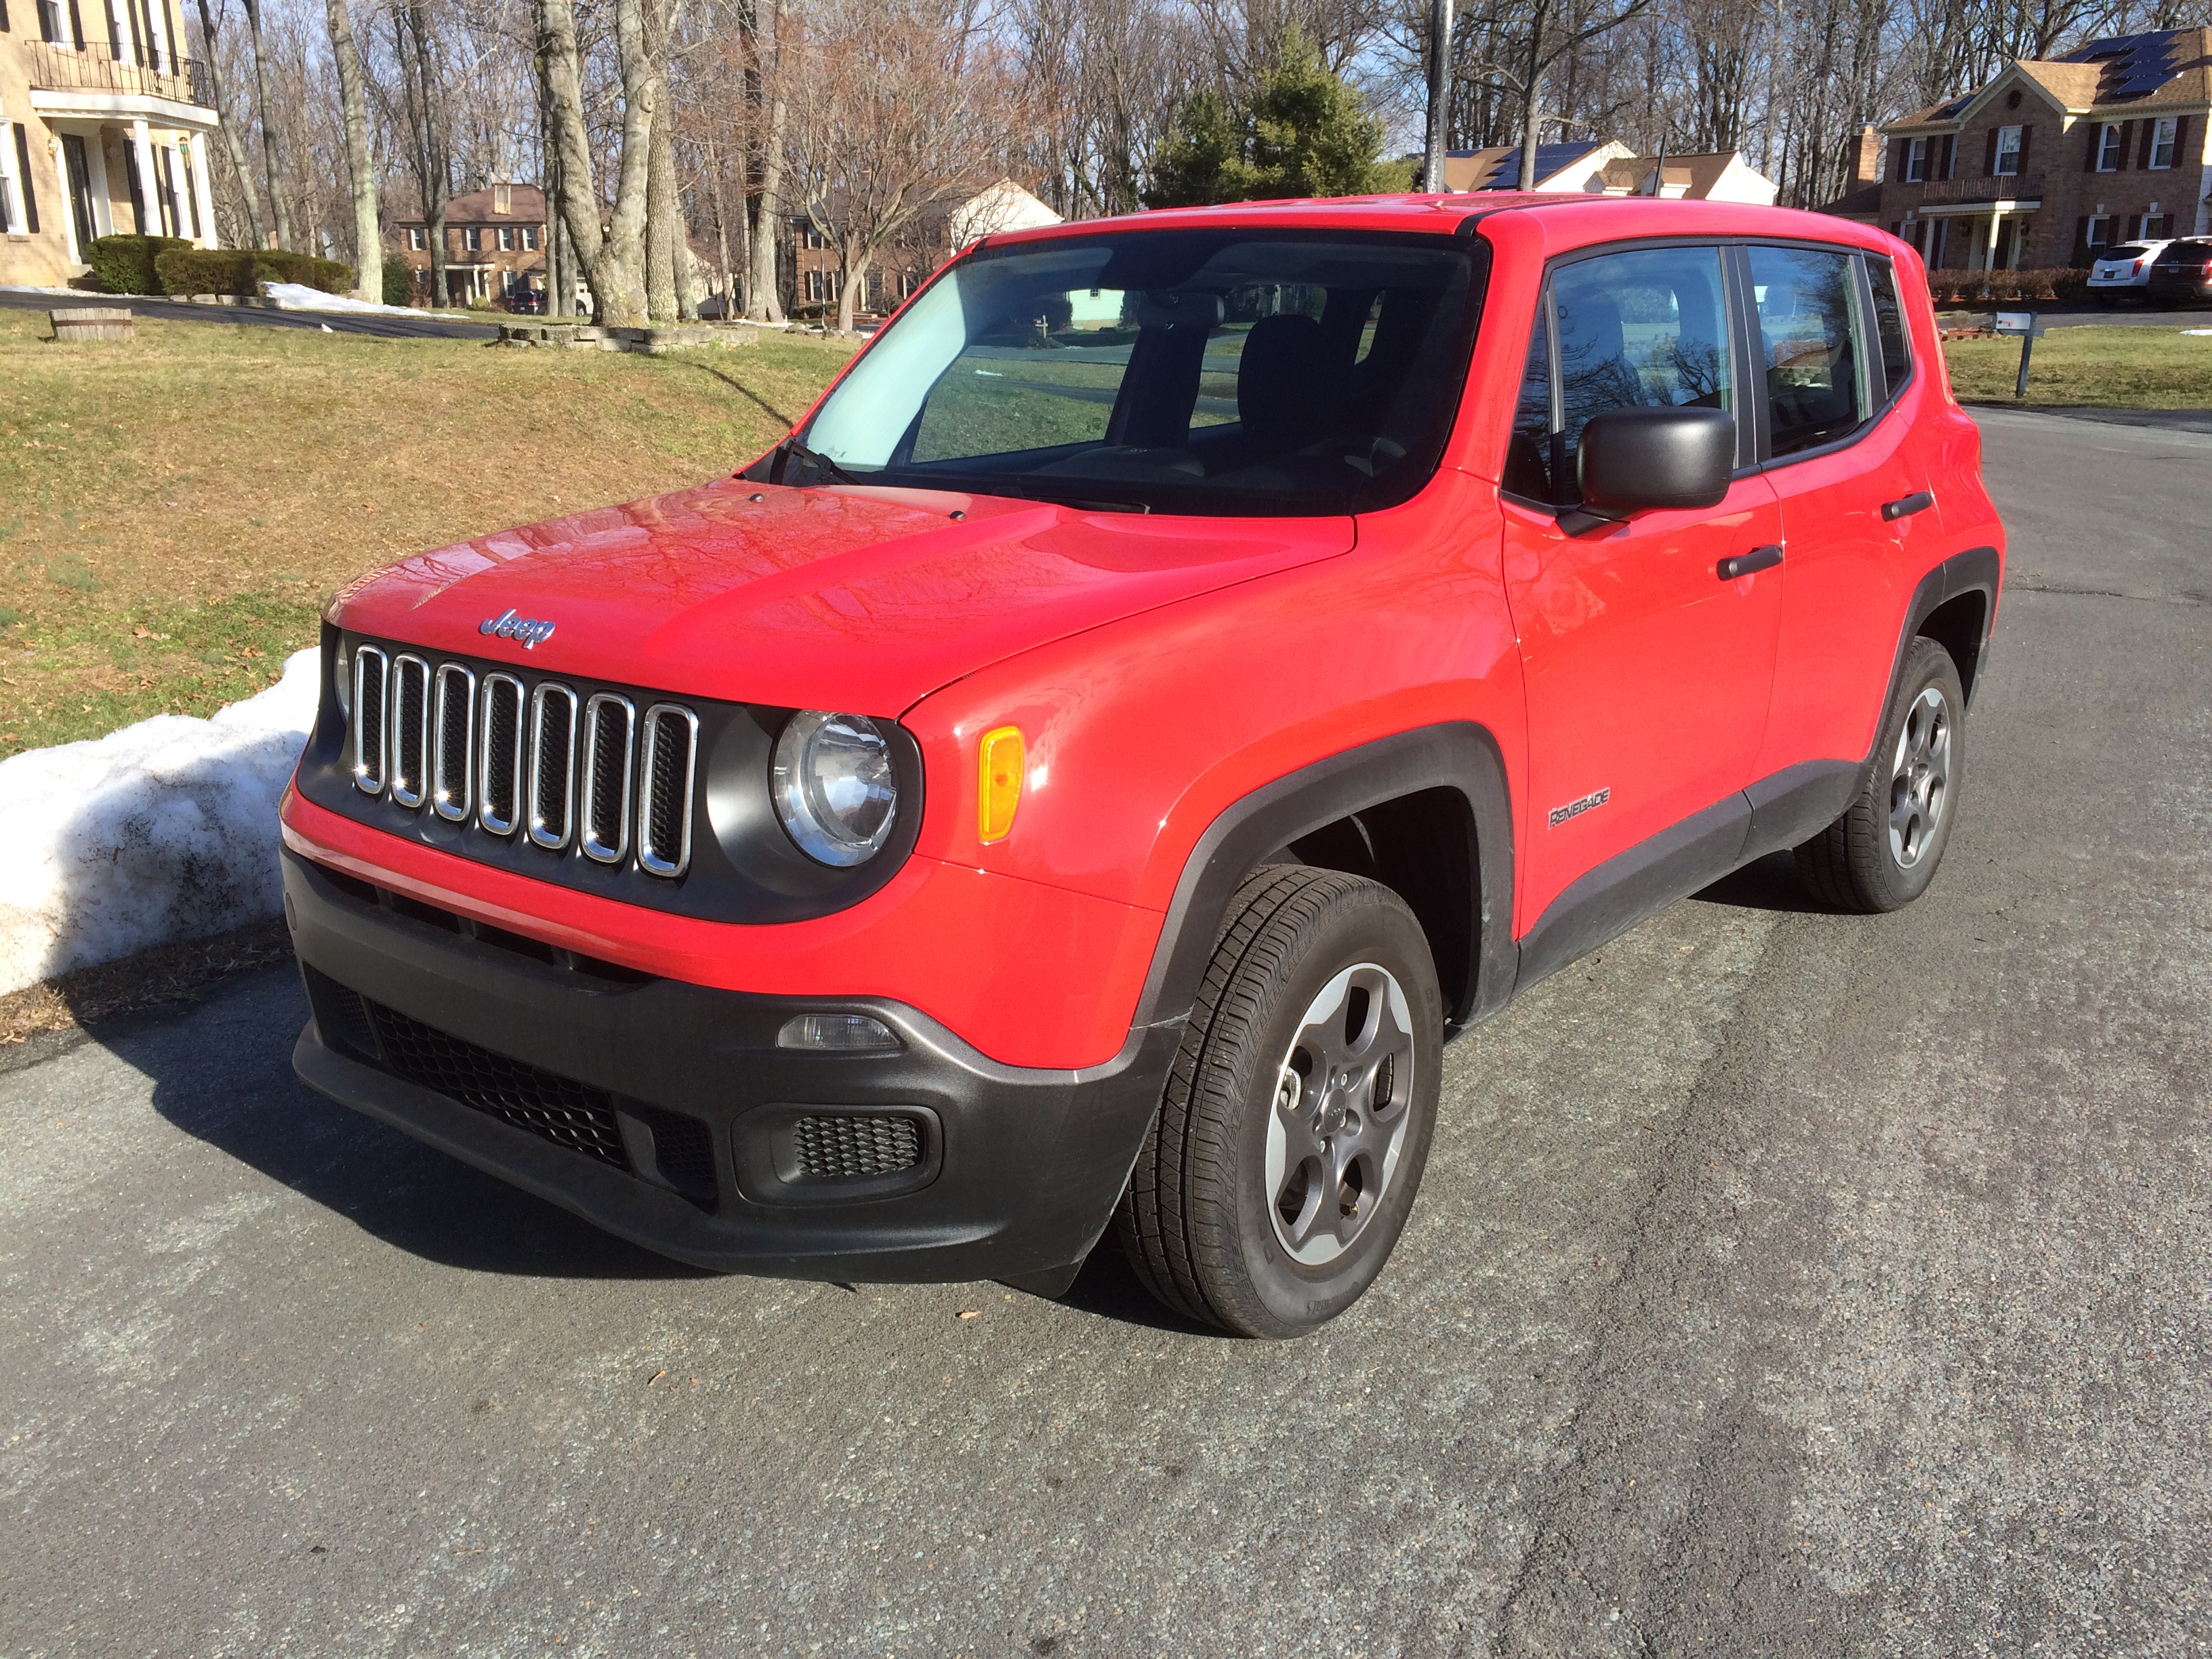 Enter small crossover craze with fun, economical Jeep Renegade Sport